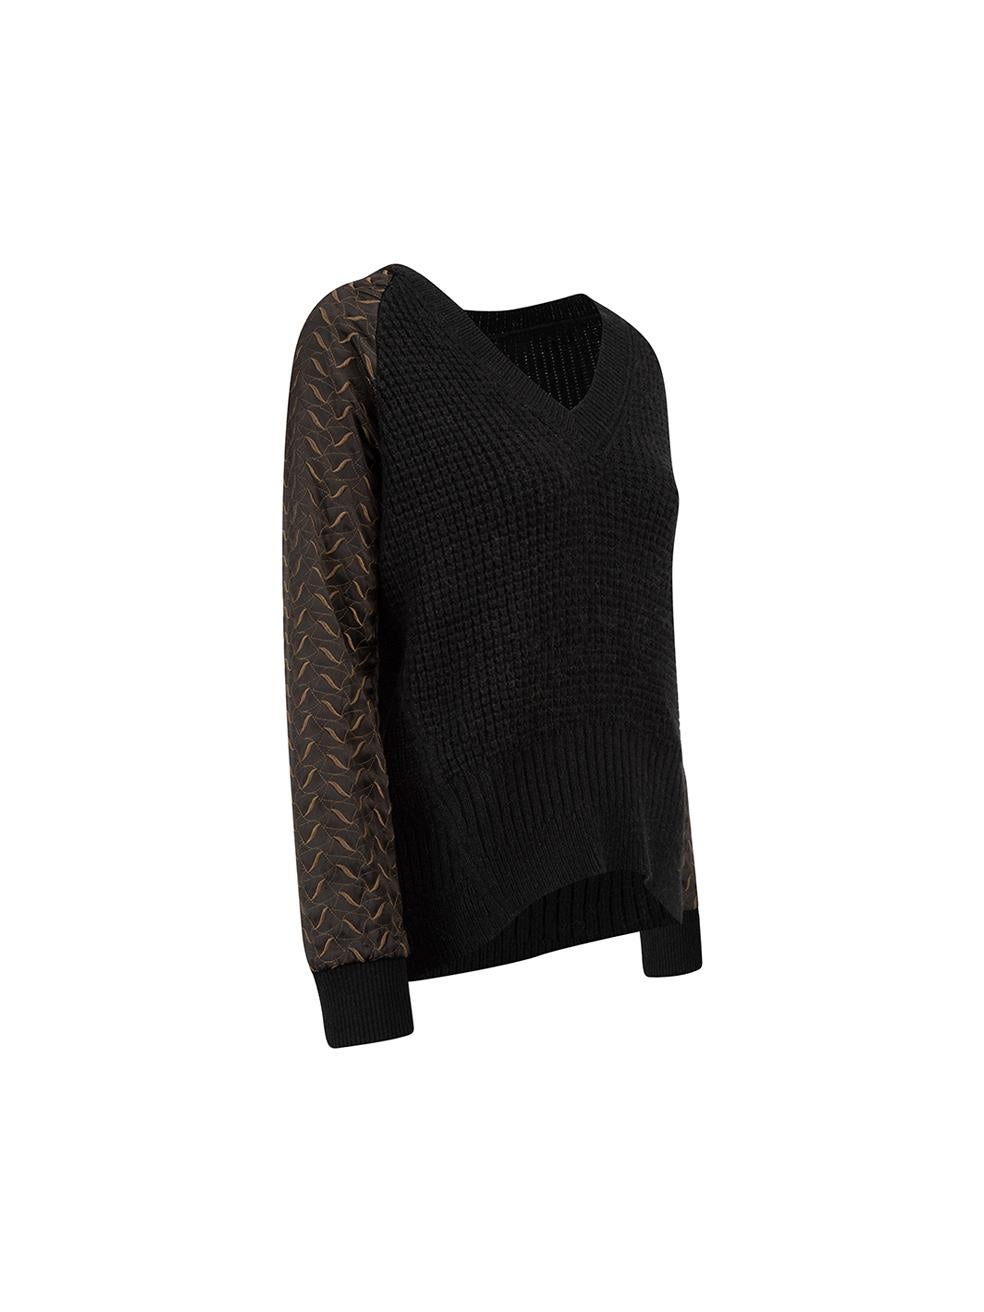 CONDITION is Very good. Hardly any visible wear to jumper is evident on this used All Saints designer resale item. 



Details


Black

Wool

Long sleeves jumper

Knitted

V neckline

Contrast embroidered sleeves





Made in